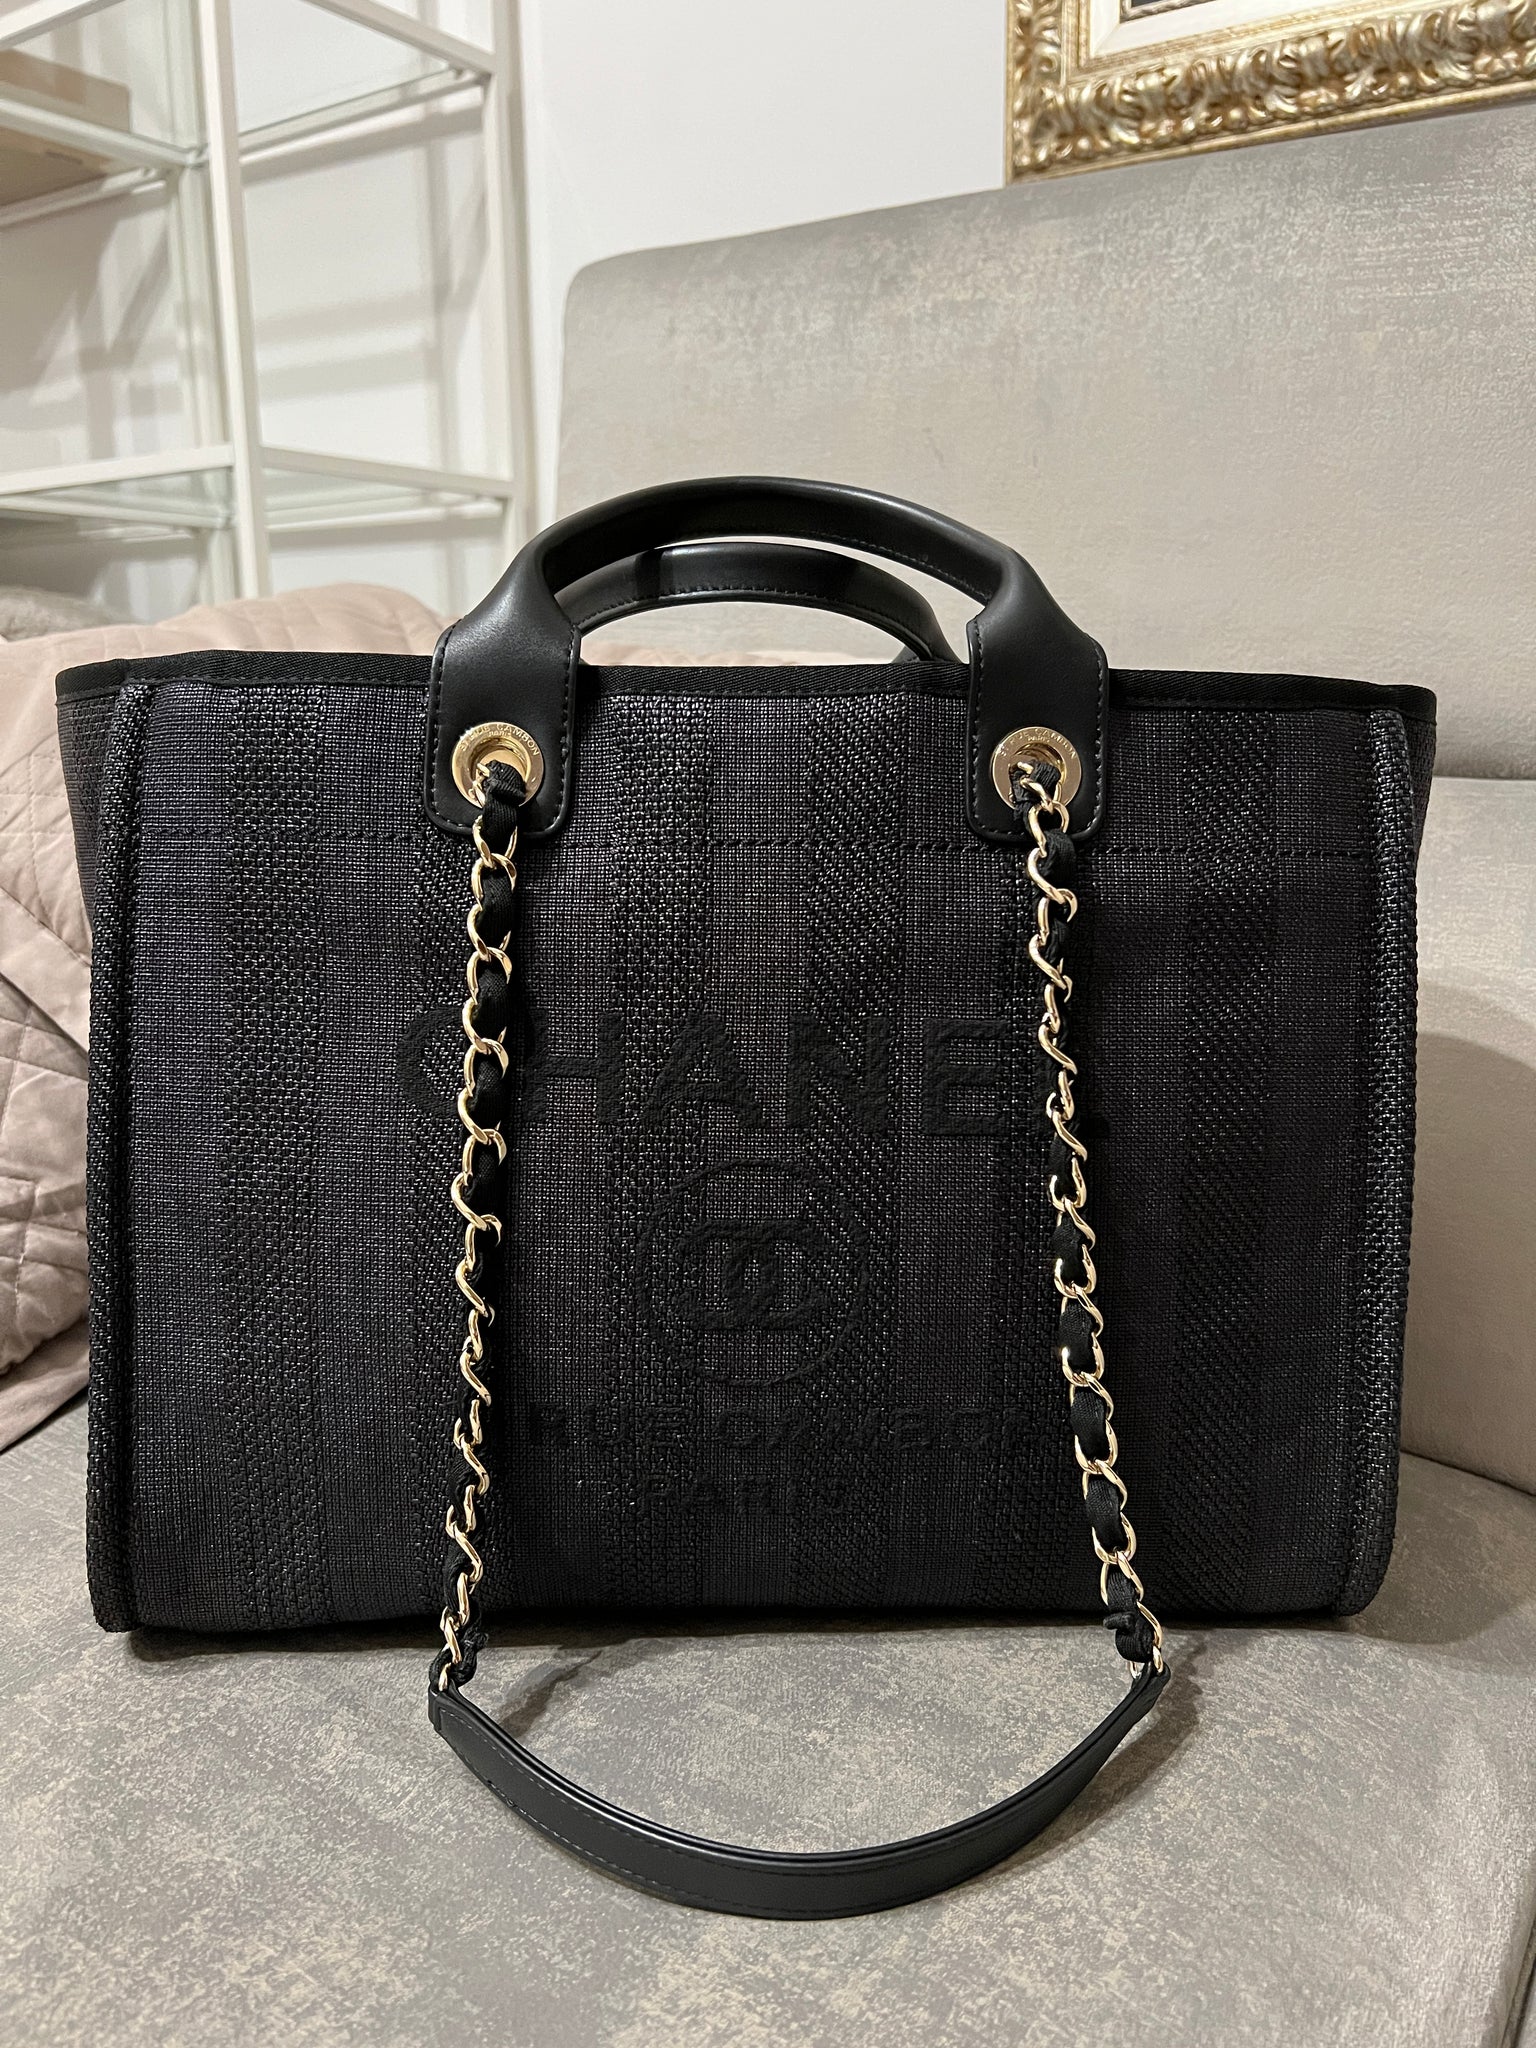 Chanel RARE Black Aged Calfskin Leather Medium Charms Deauville Tote Bag